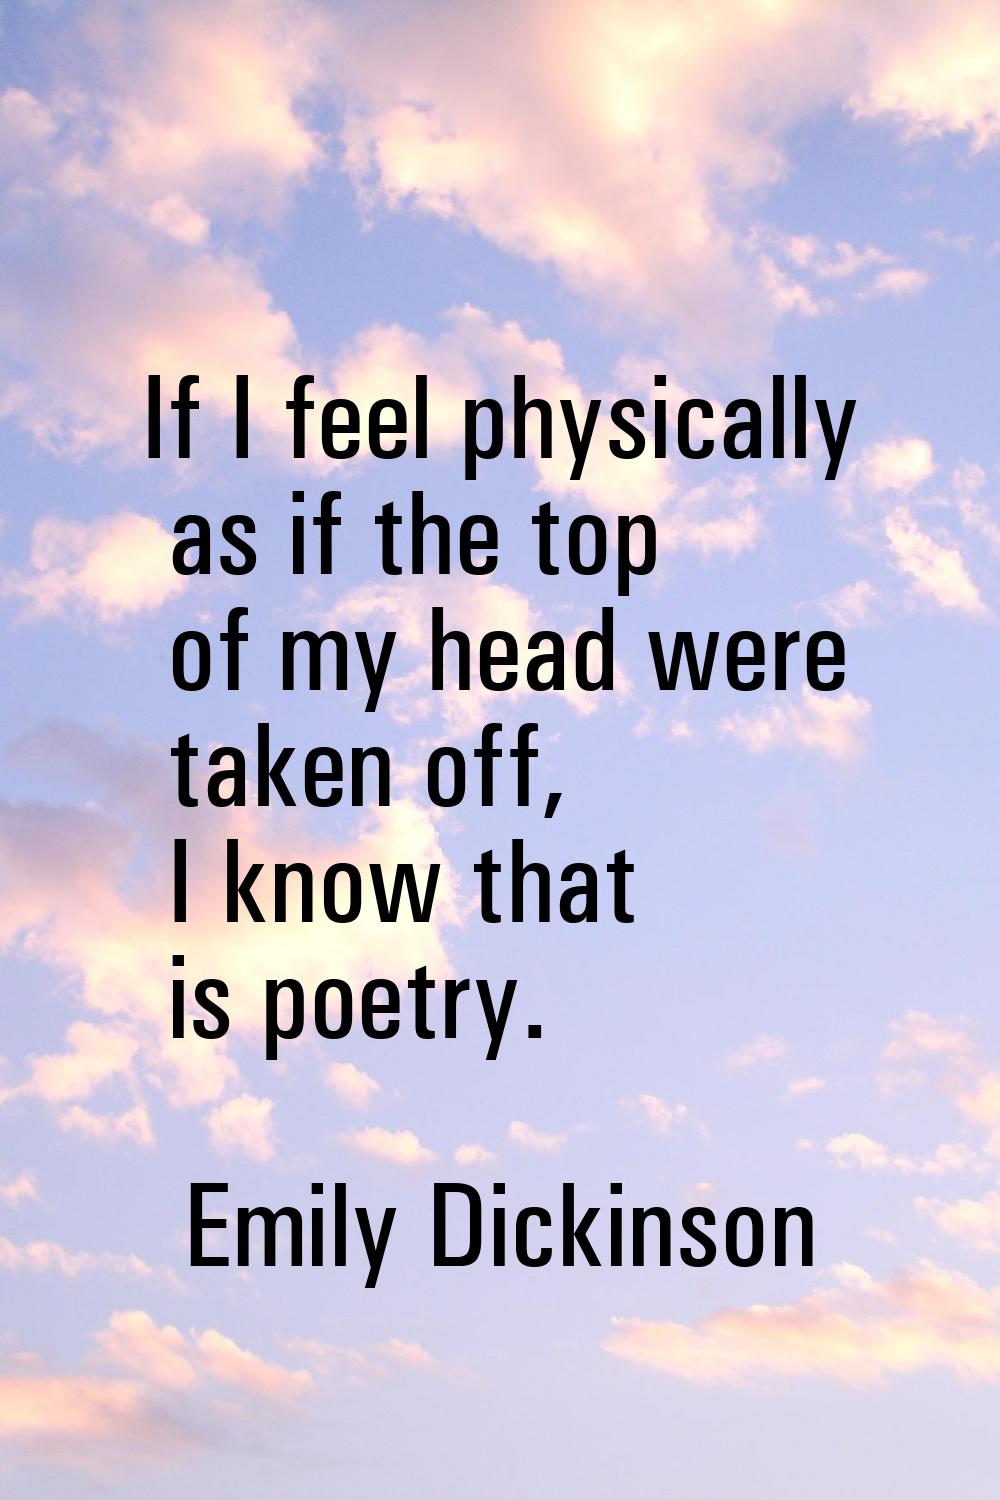 If I feel physically as if the top of my head were taken off, I know that is poetry.